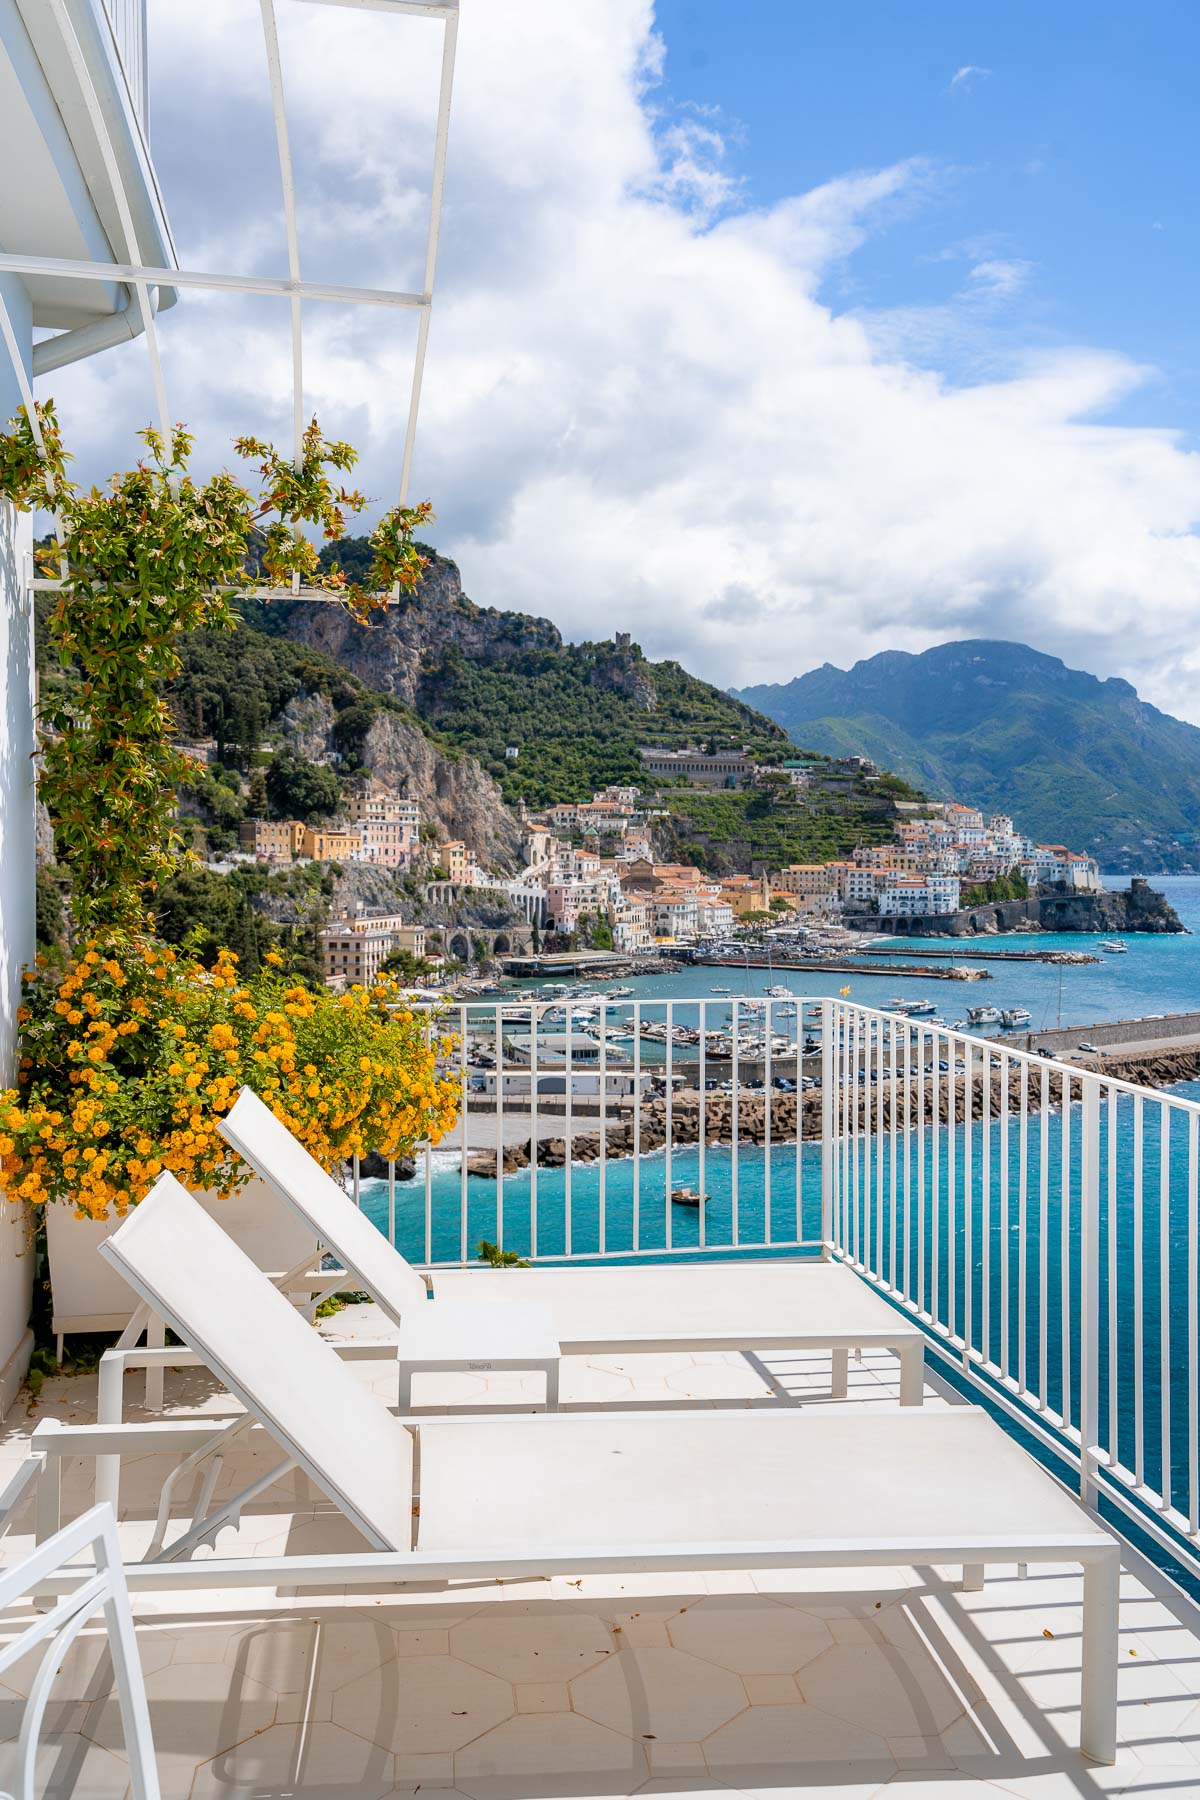 Sun loungers on the terrace at the Sea View Suite at Hotel Miramalfi